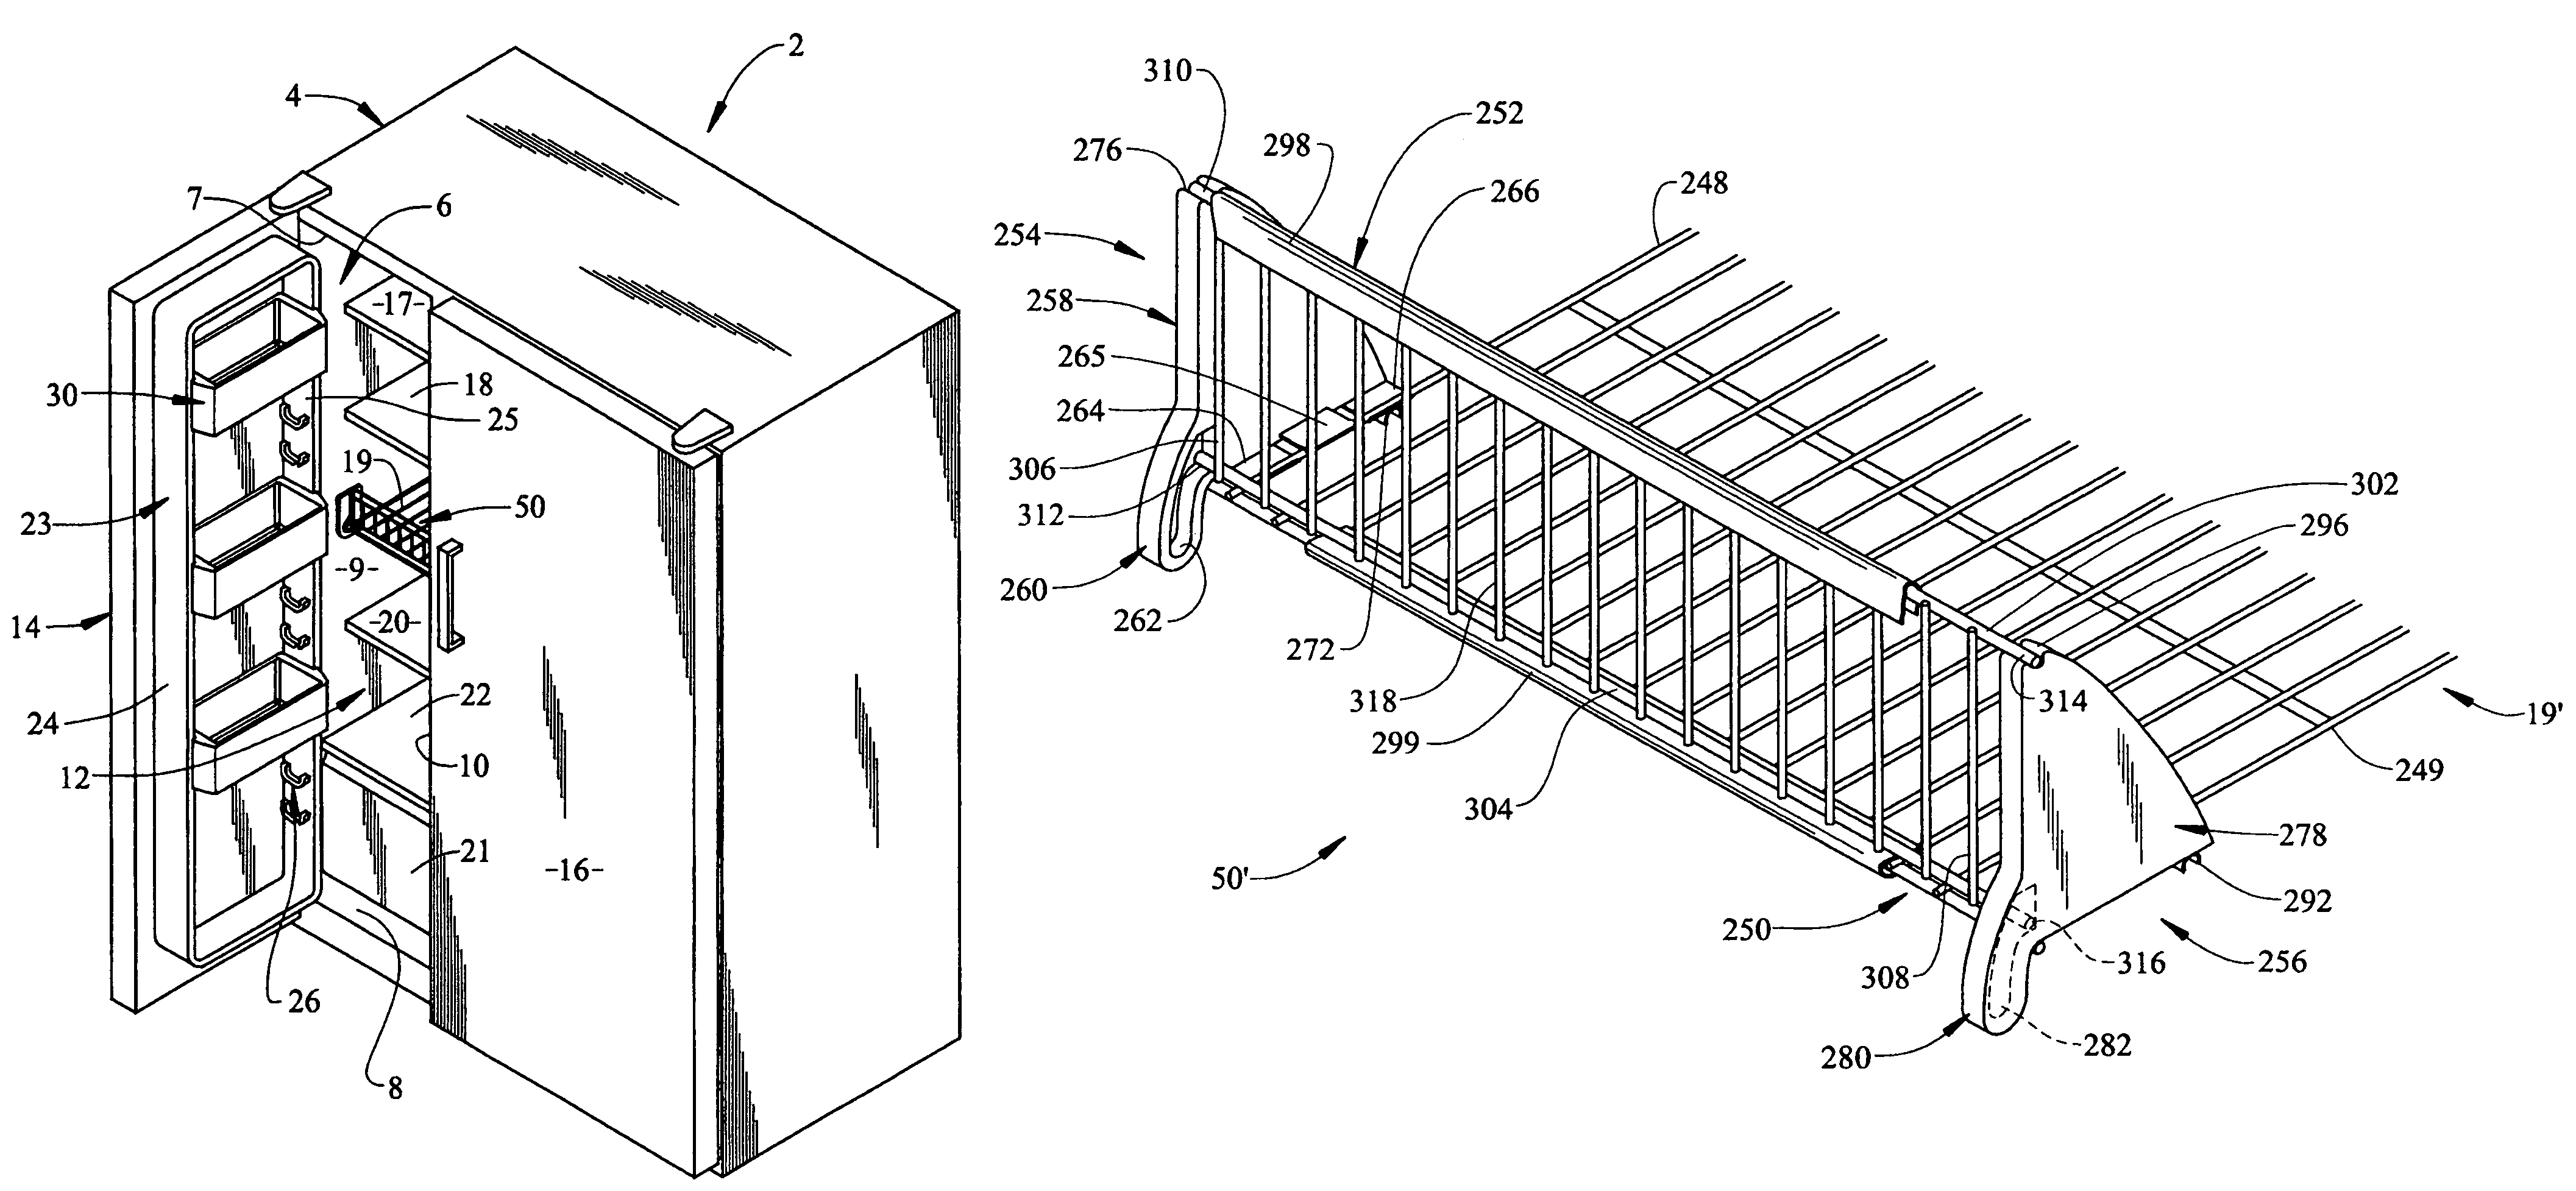 Article retainer assembly for refrigerators